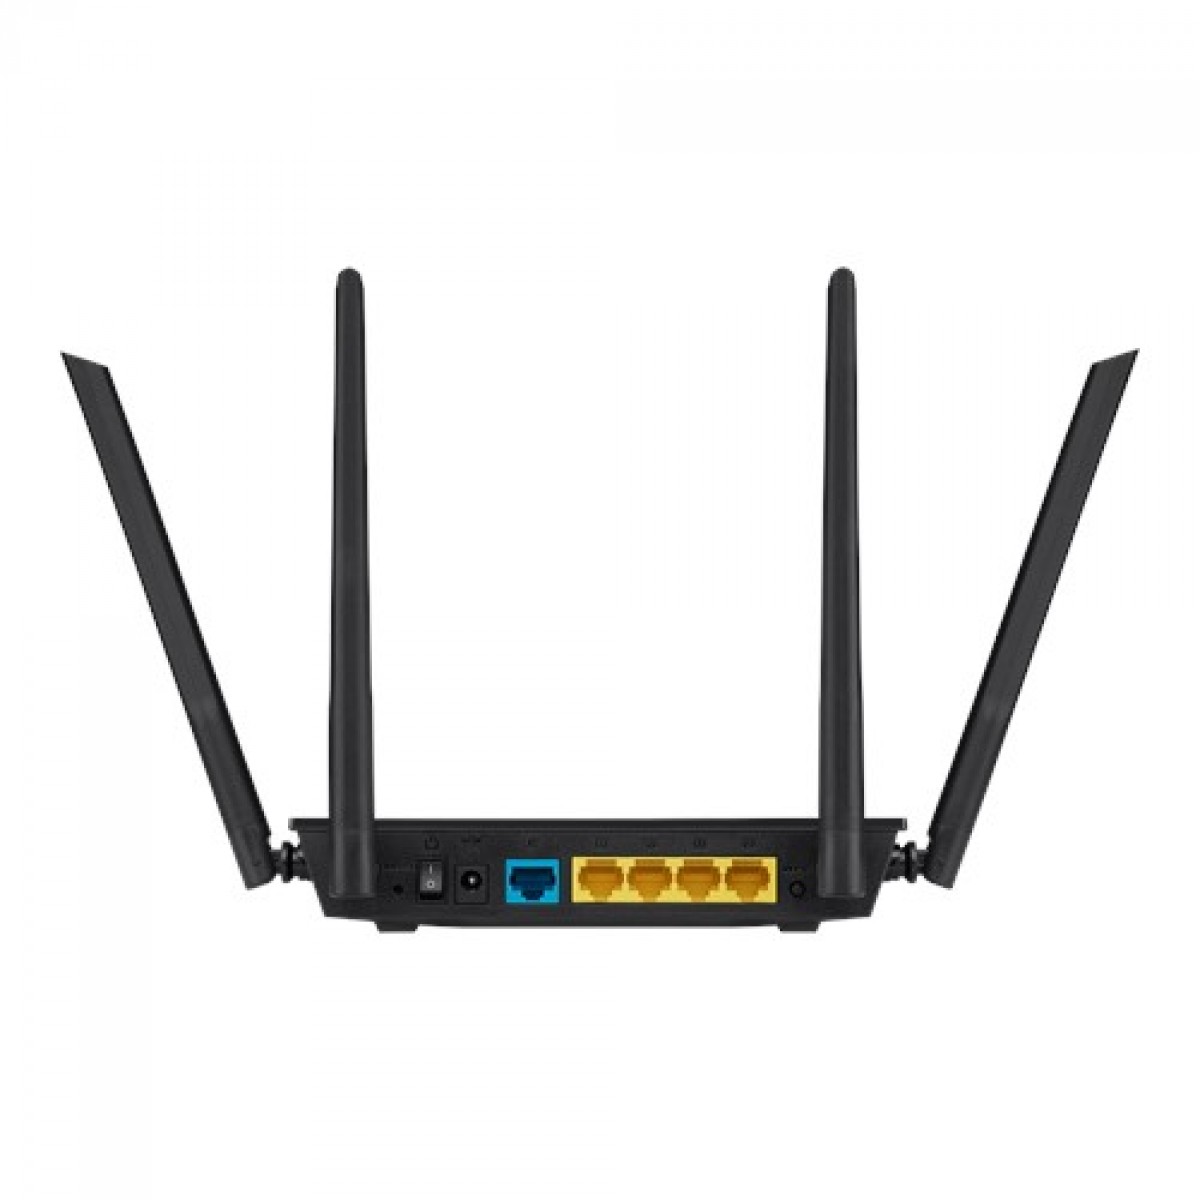 Roteador Asus, RT-AC1200 V2, Wireless, AC1200, 5G 256QAM, MIMO, 90IG0550-BY3400